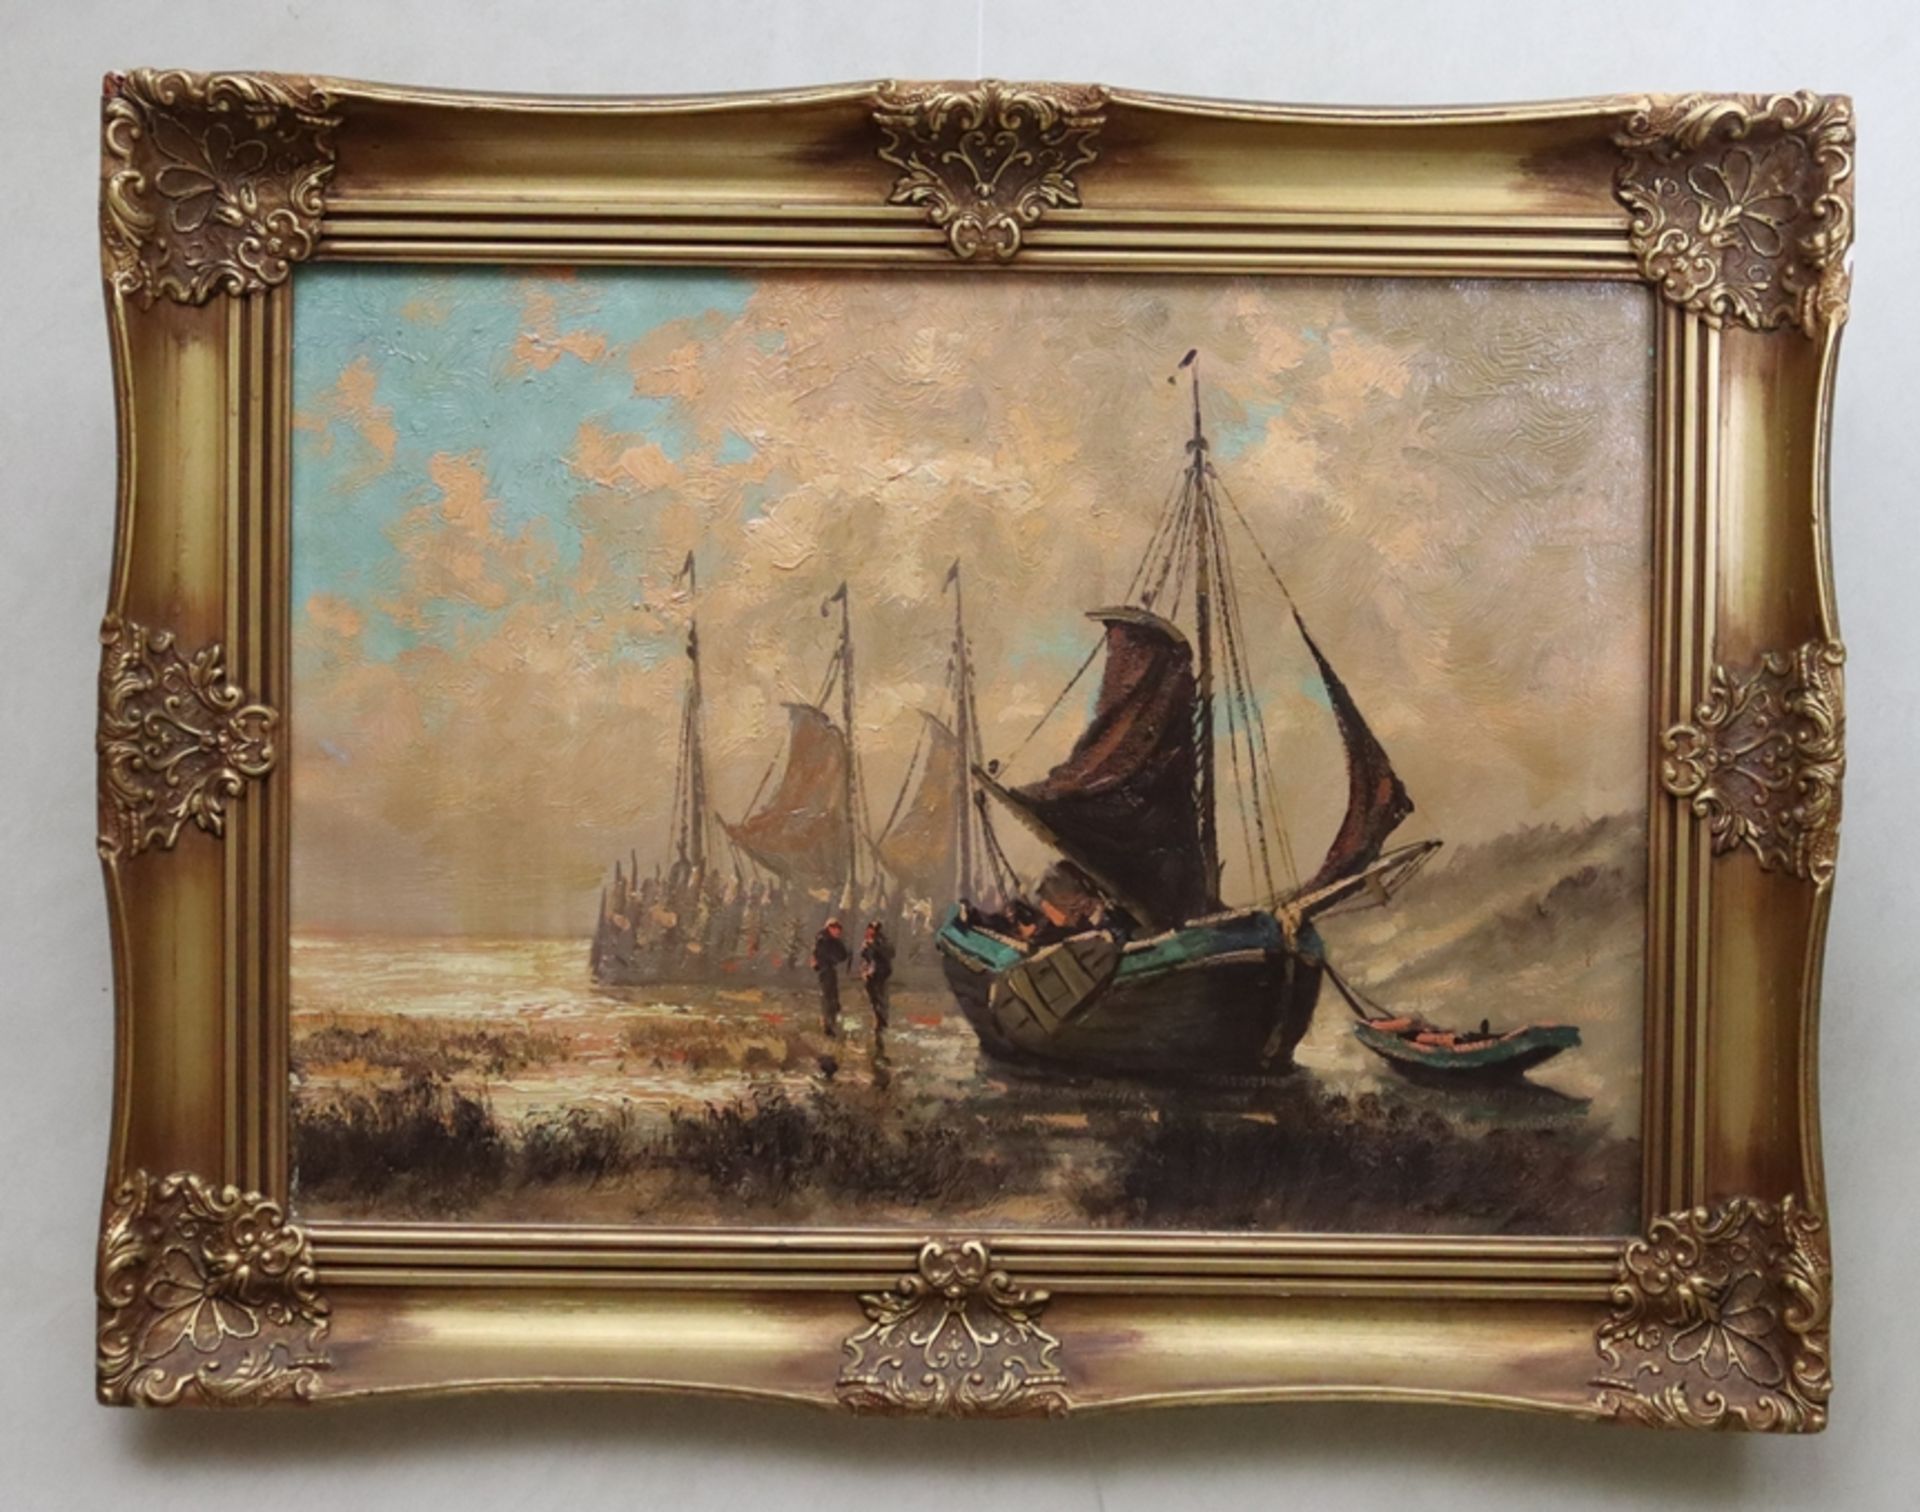 Unknown North German artist, sailing ships in the evening atmosphere - Image 2 of 3